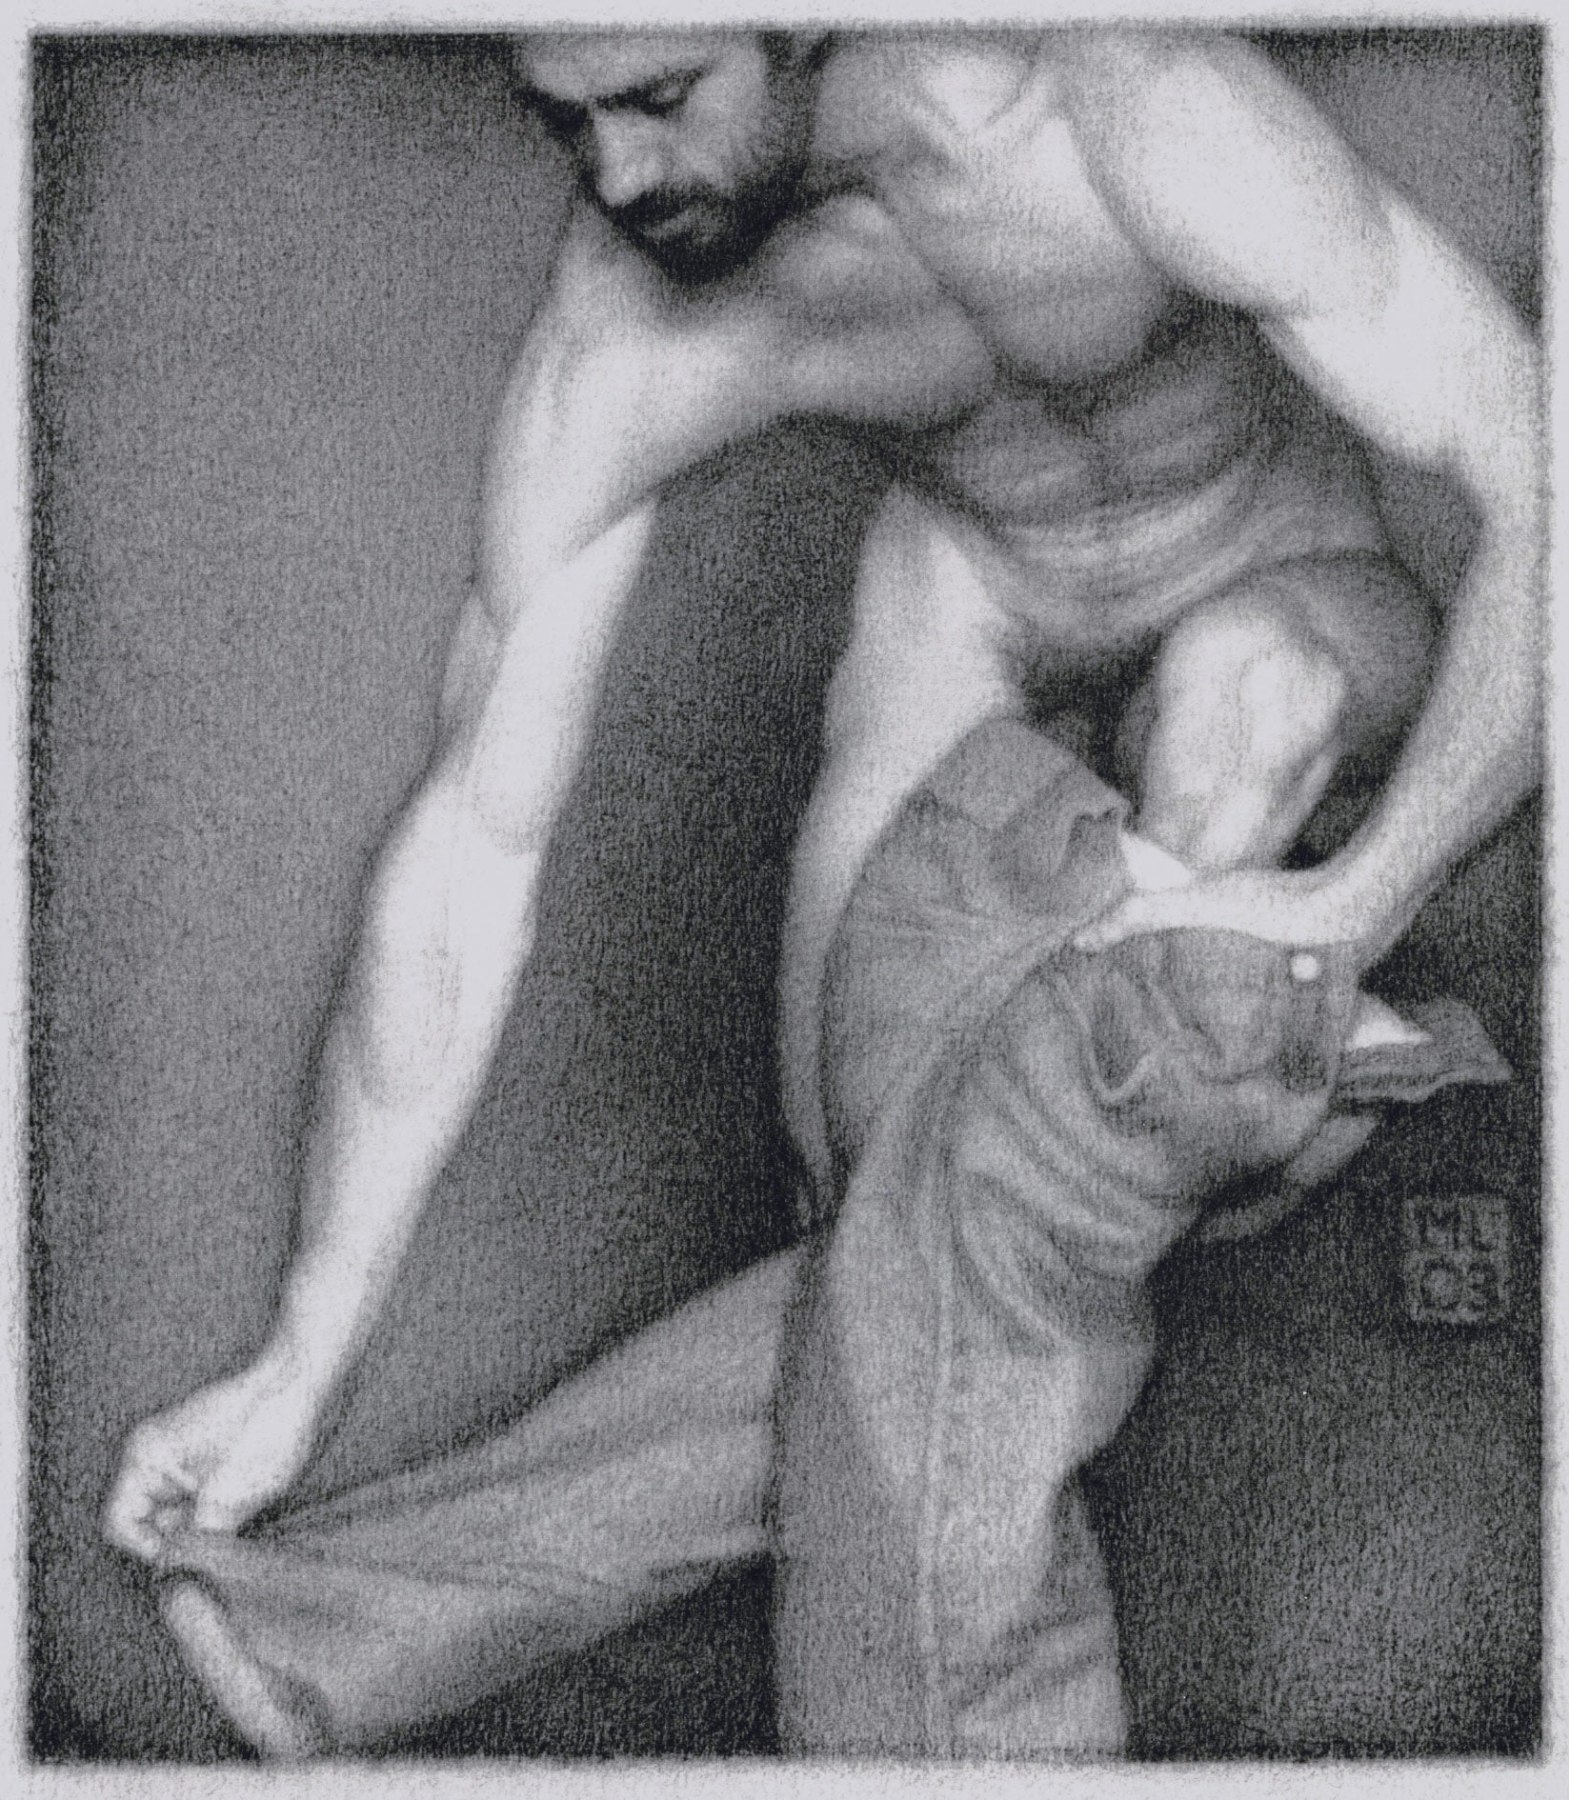 Michael Leonard, Climbing Out, 2003, graphite pencil on paper, 8 7/8 x 6 5/8 inches